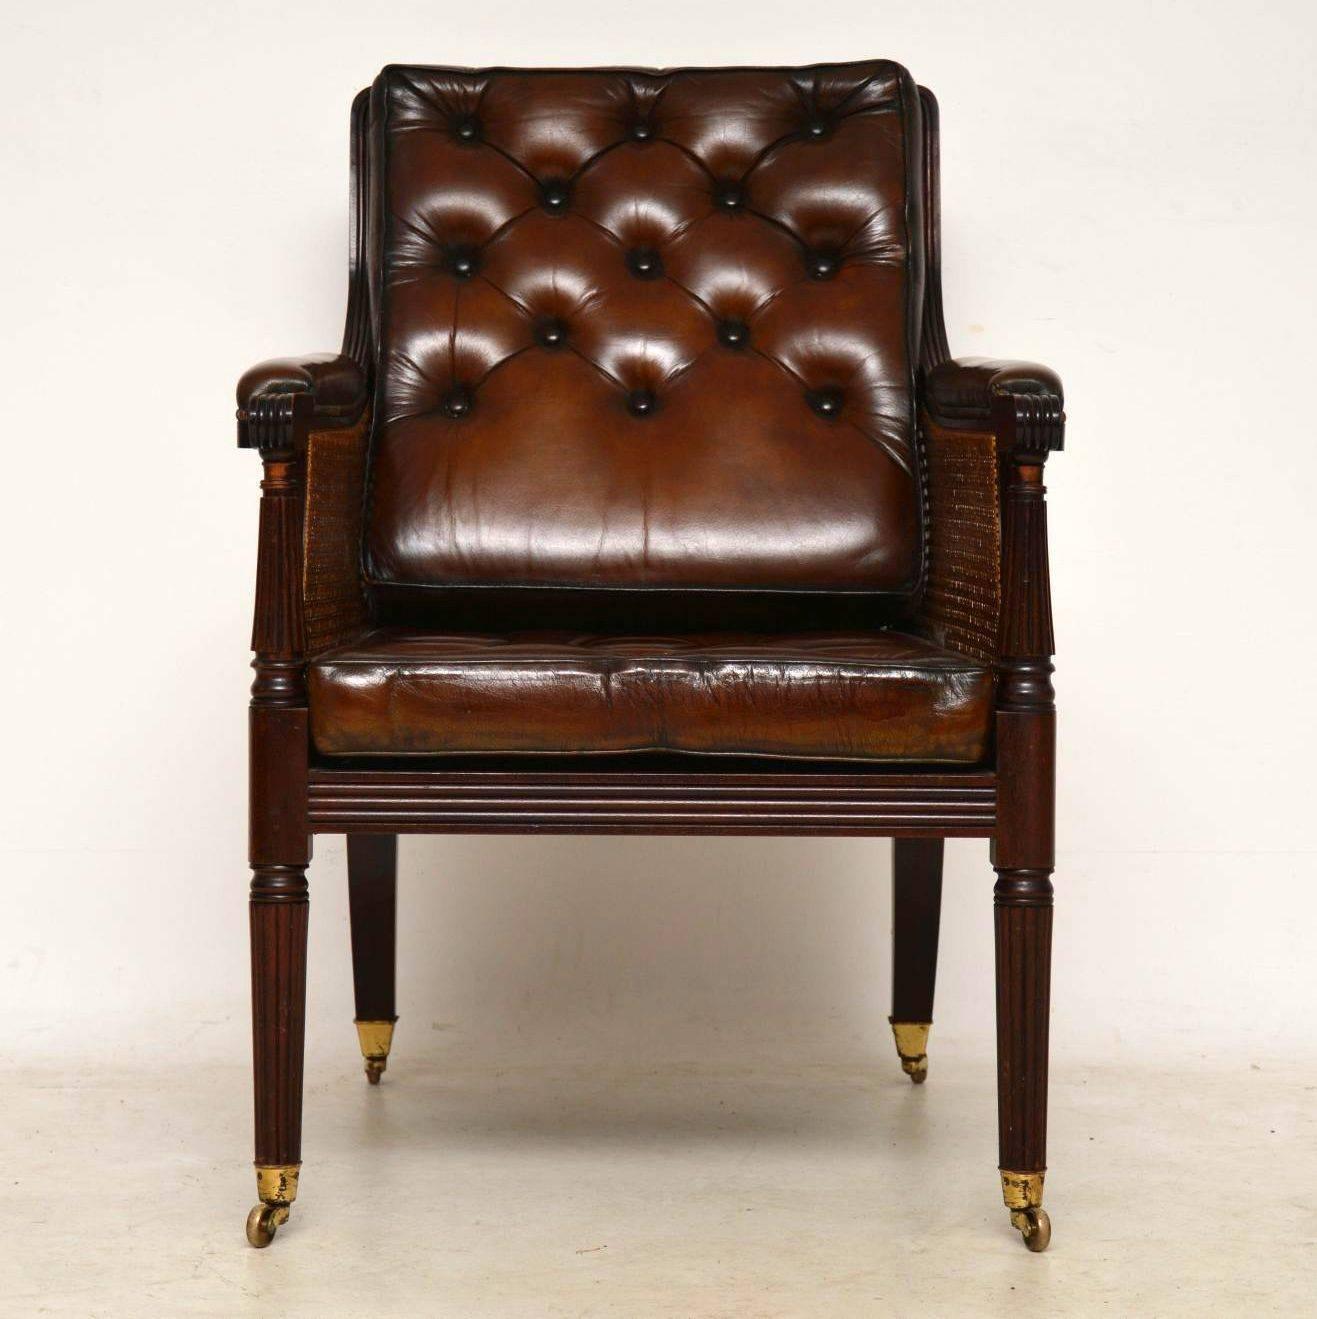 Regency Antique Leather and Caned Mahogany Armchair